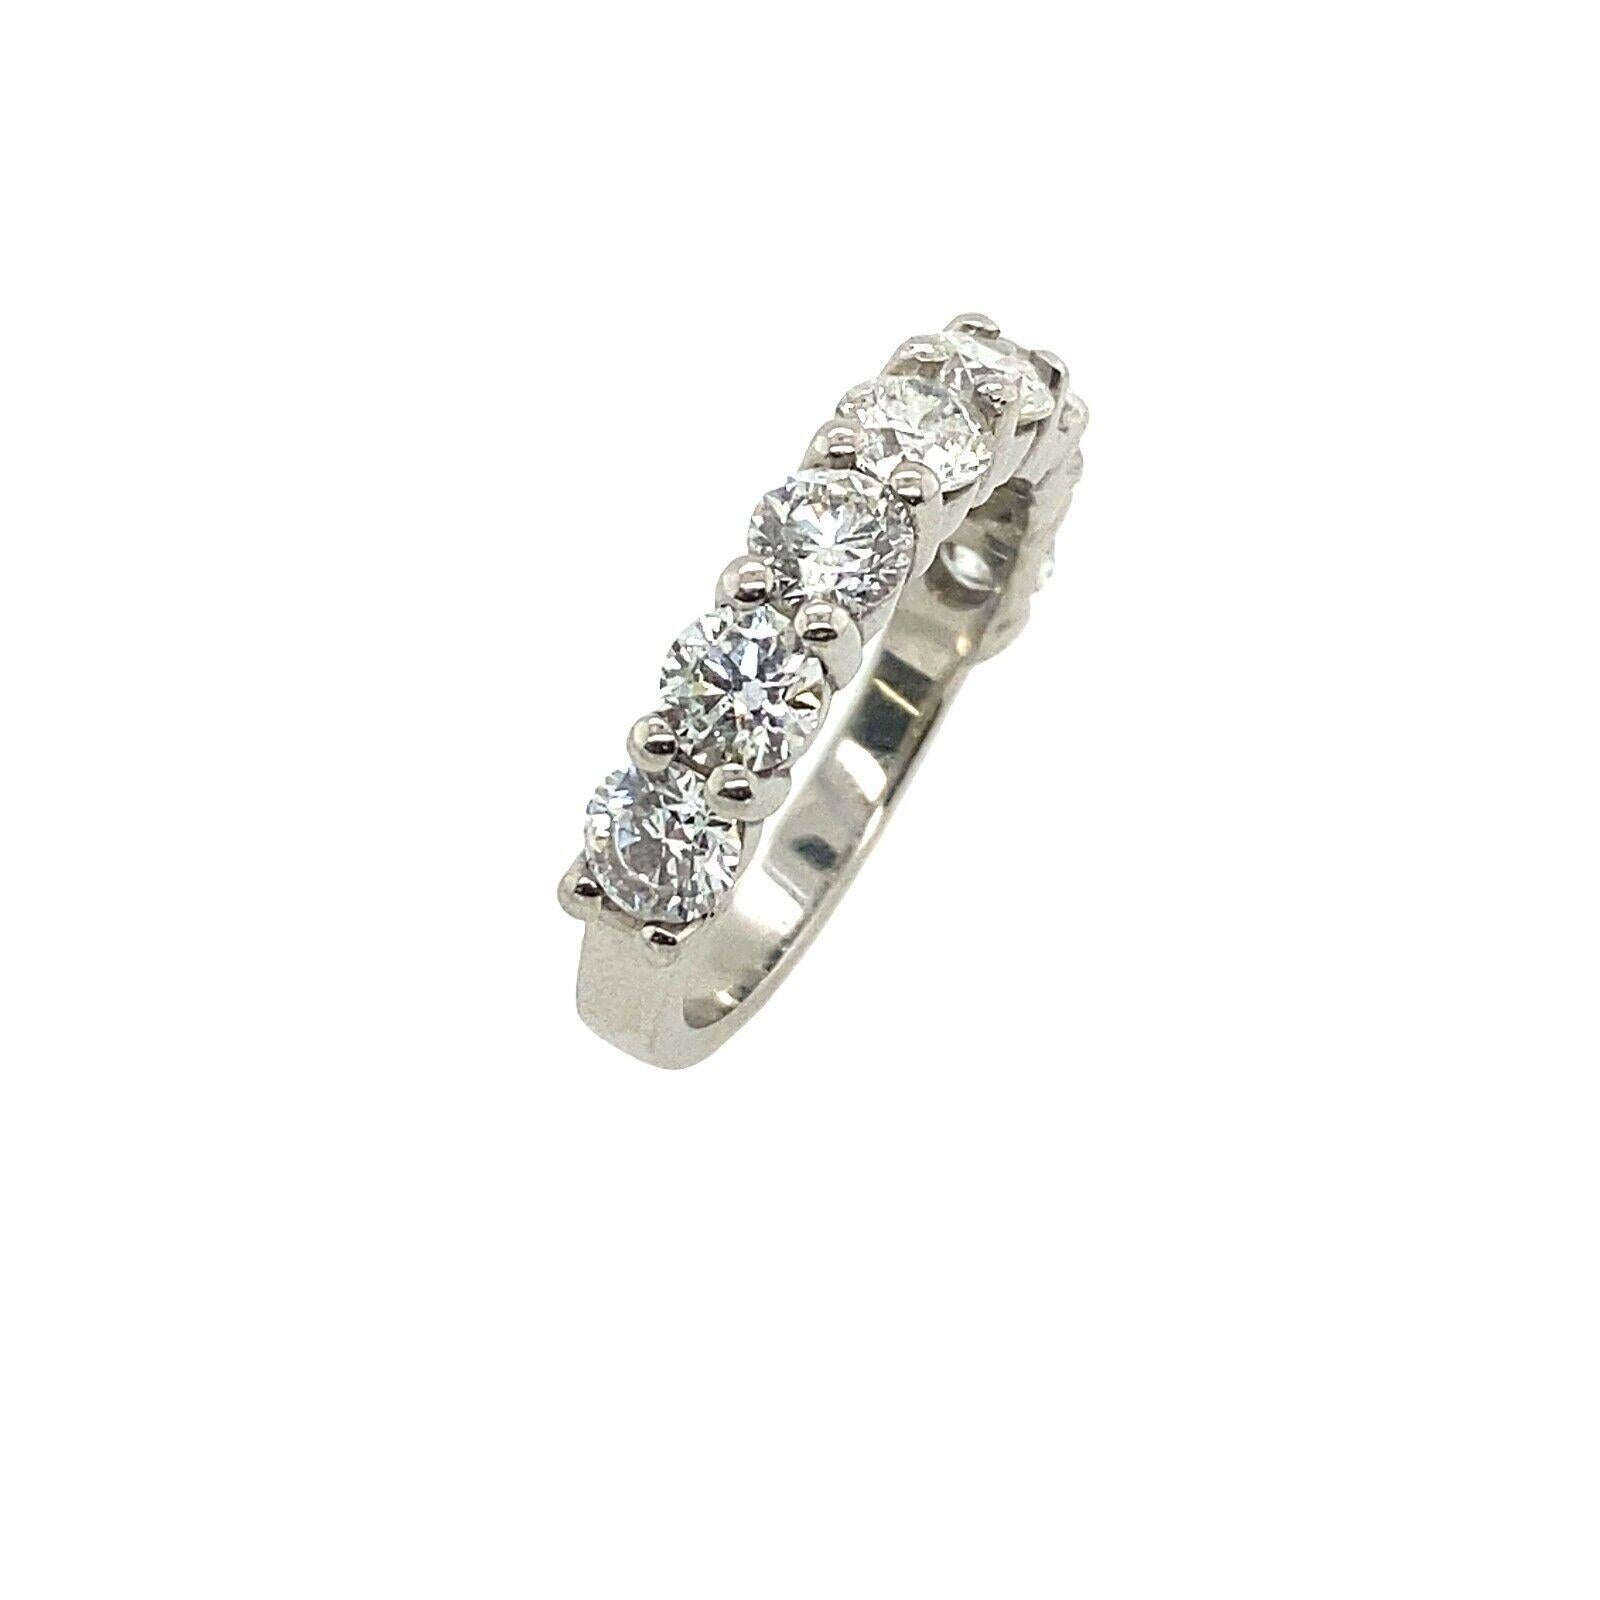 Natural Diamond Half Eternity Ring Set with 9 Diamonds in Platinum

This stunning eternity ring is set  with 2.80ct of natural round brilliant cut Diamonds  in a 2.70mm wide band with a polished finish.

Additional Information:
Diamond Colour: